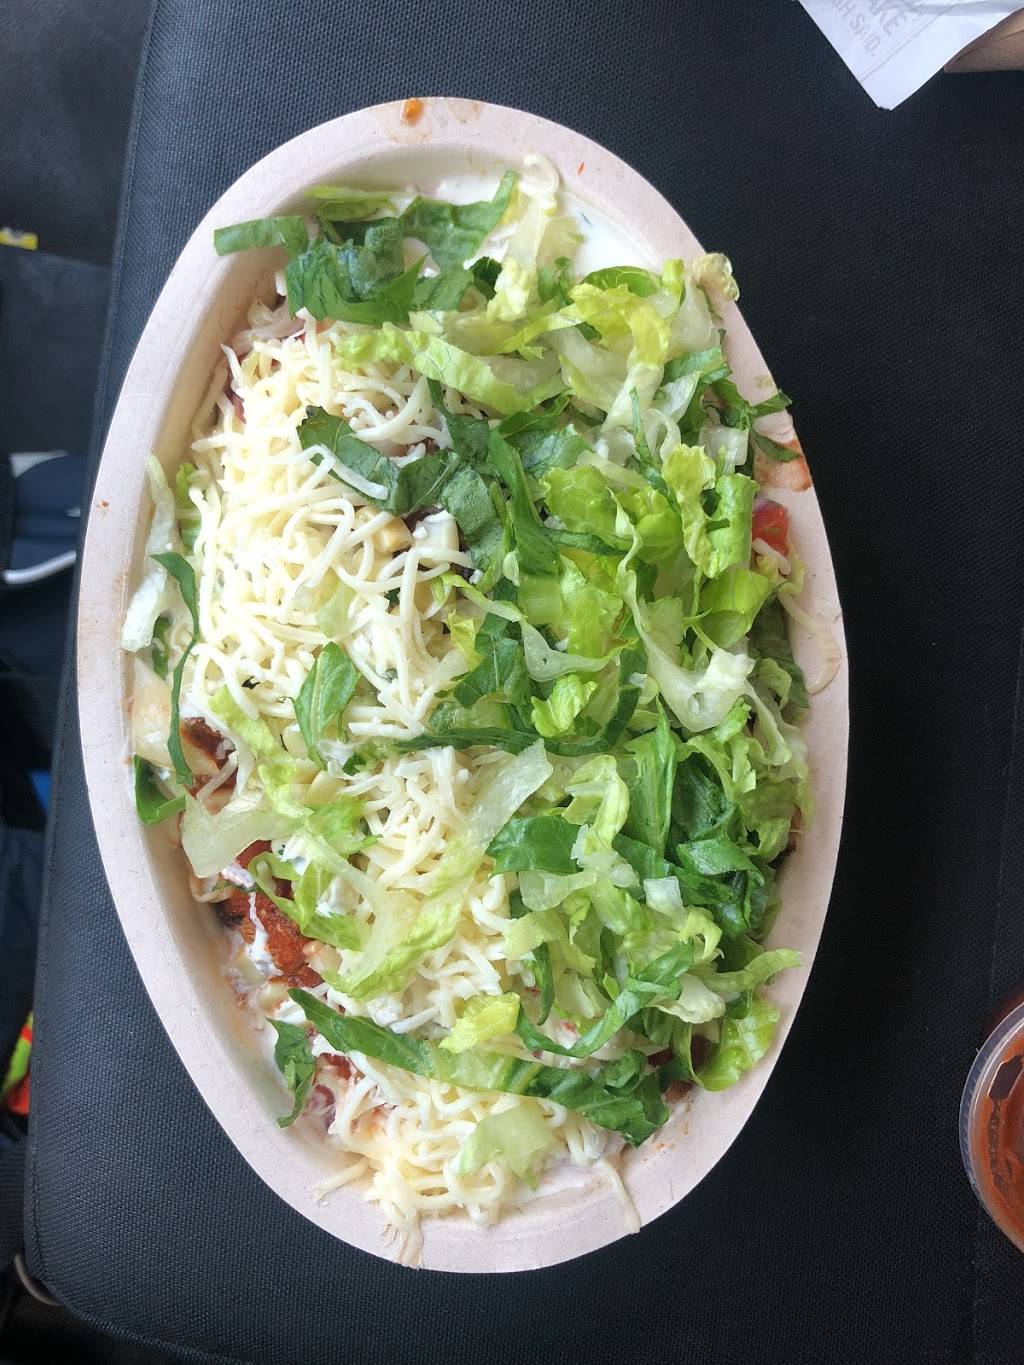 Chipotle Mexican Grill | restaurant | 700 Plaza Dr, Secaucus, NJ 07094, USA | 2012230562 OR +1 201-223-0562